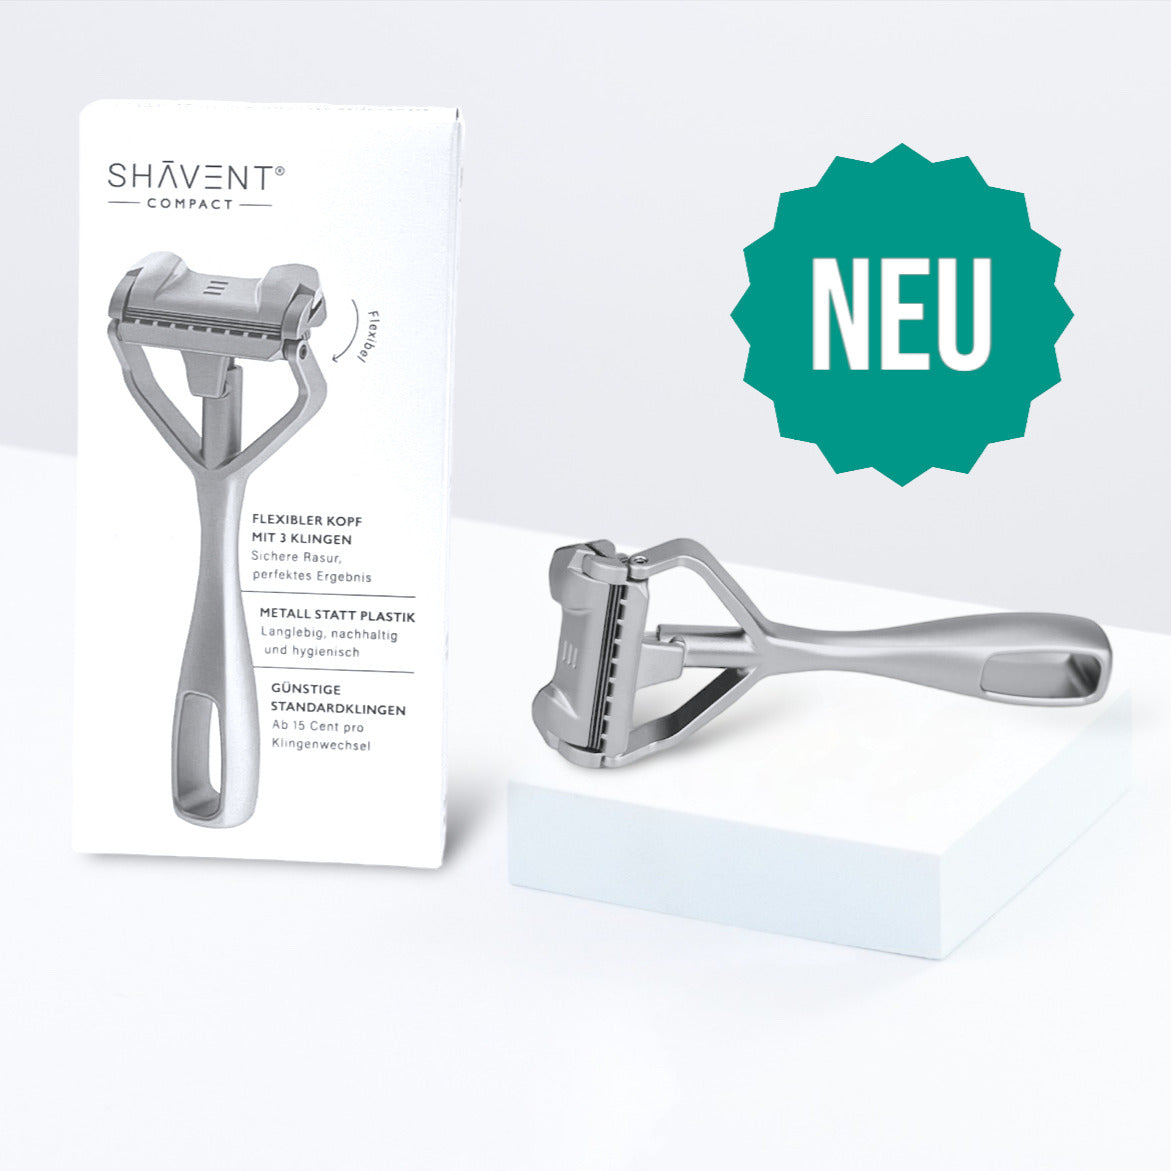 NEW: SHAVENT Compact - metal flex head shaver in travel size